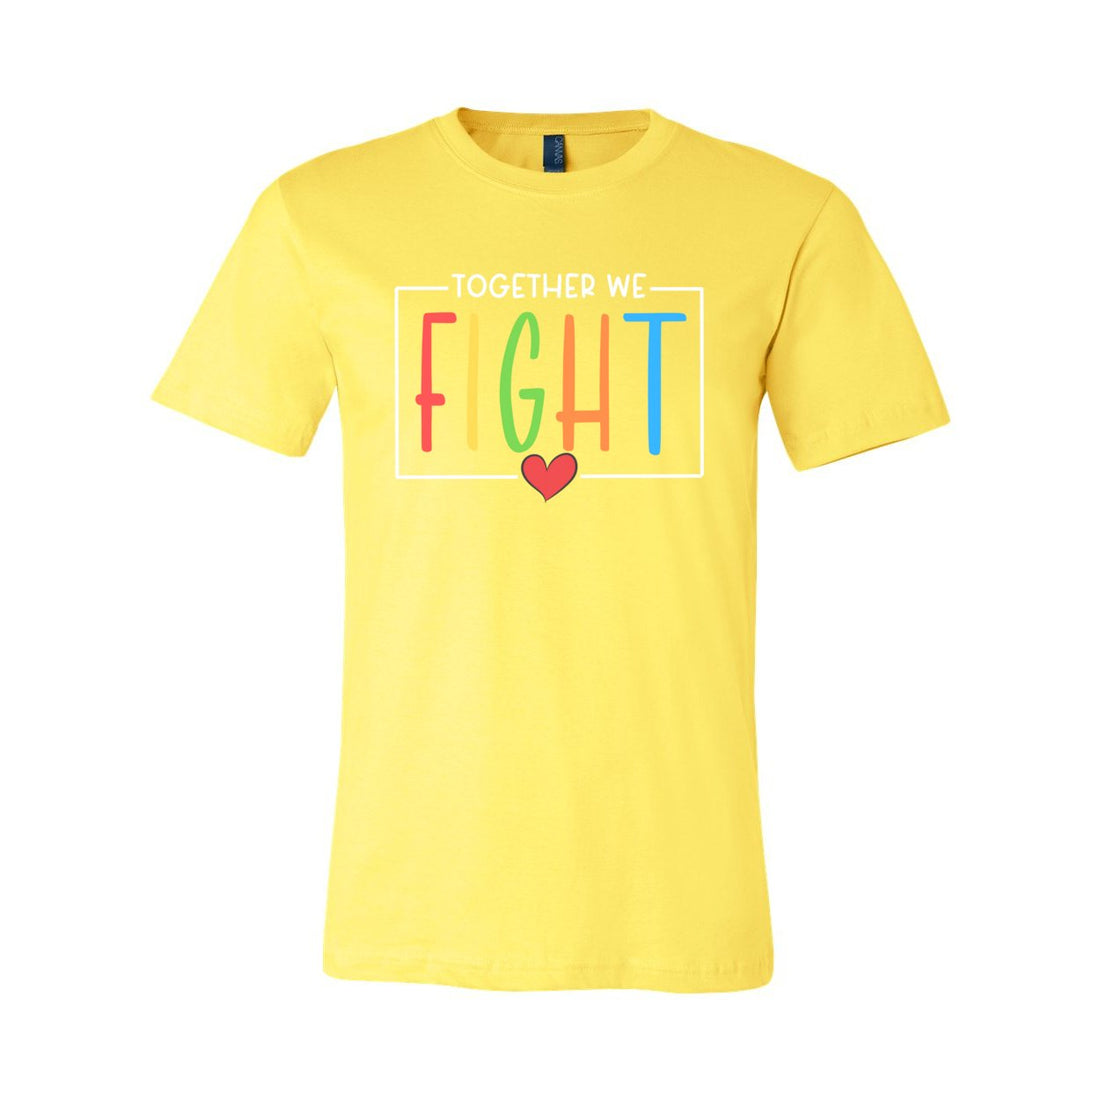 Together We Fight - T-Shirts - Positively Sassy - Together We Fight